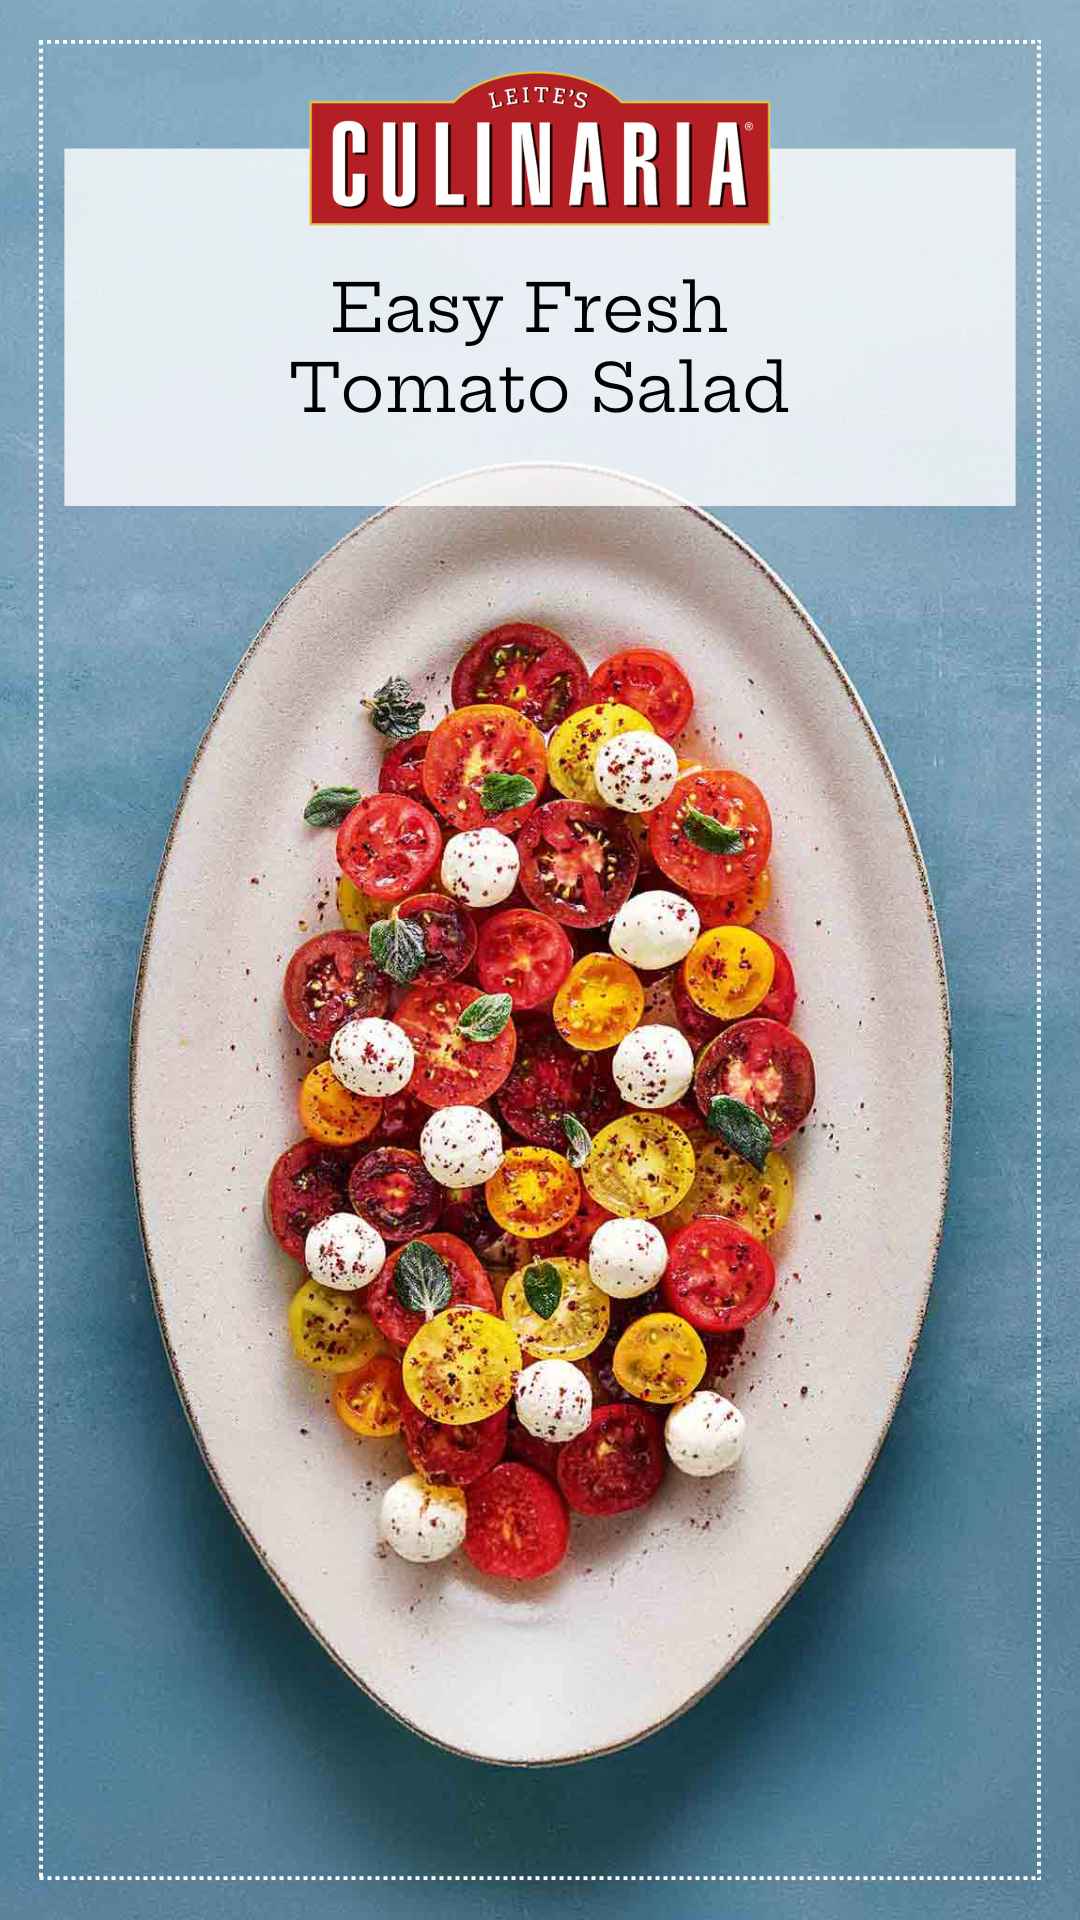 An oval platter filled with sliced tomatoes, balls of labneh, fresh herbs, and a dressing.